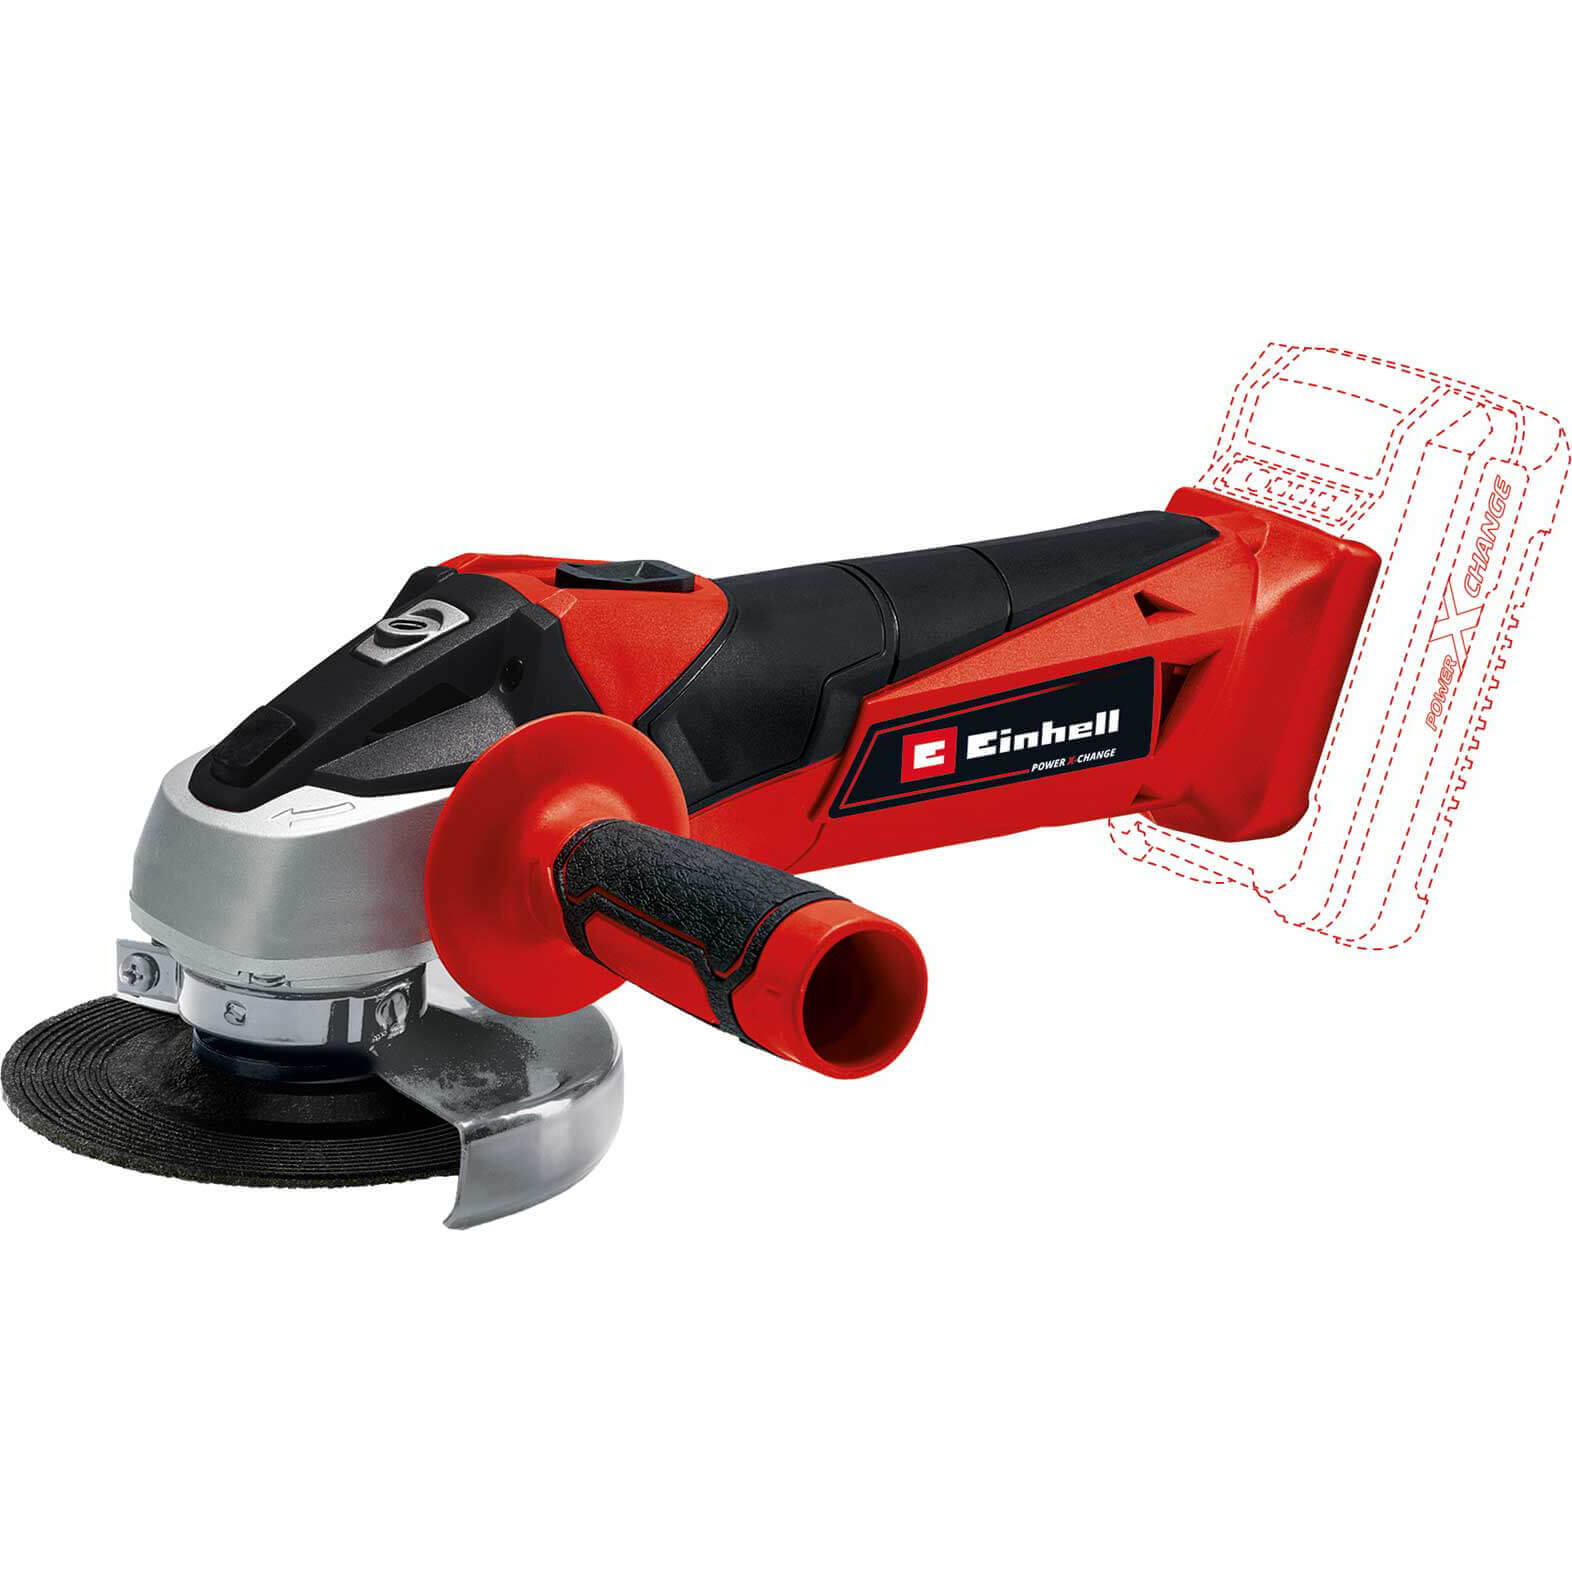 Photo of Einhell Tc-ag 18/115 Li Angle Grinder 115mm No Batteries No Charger No Case